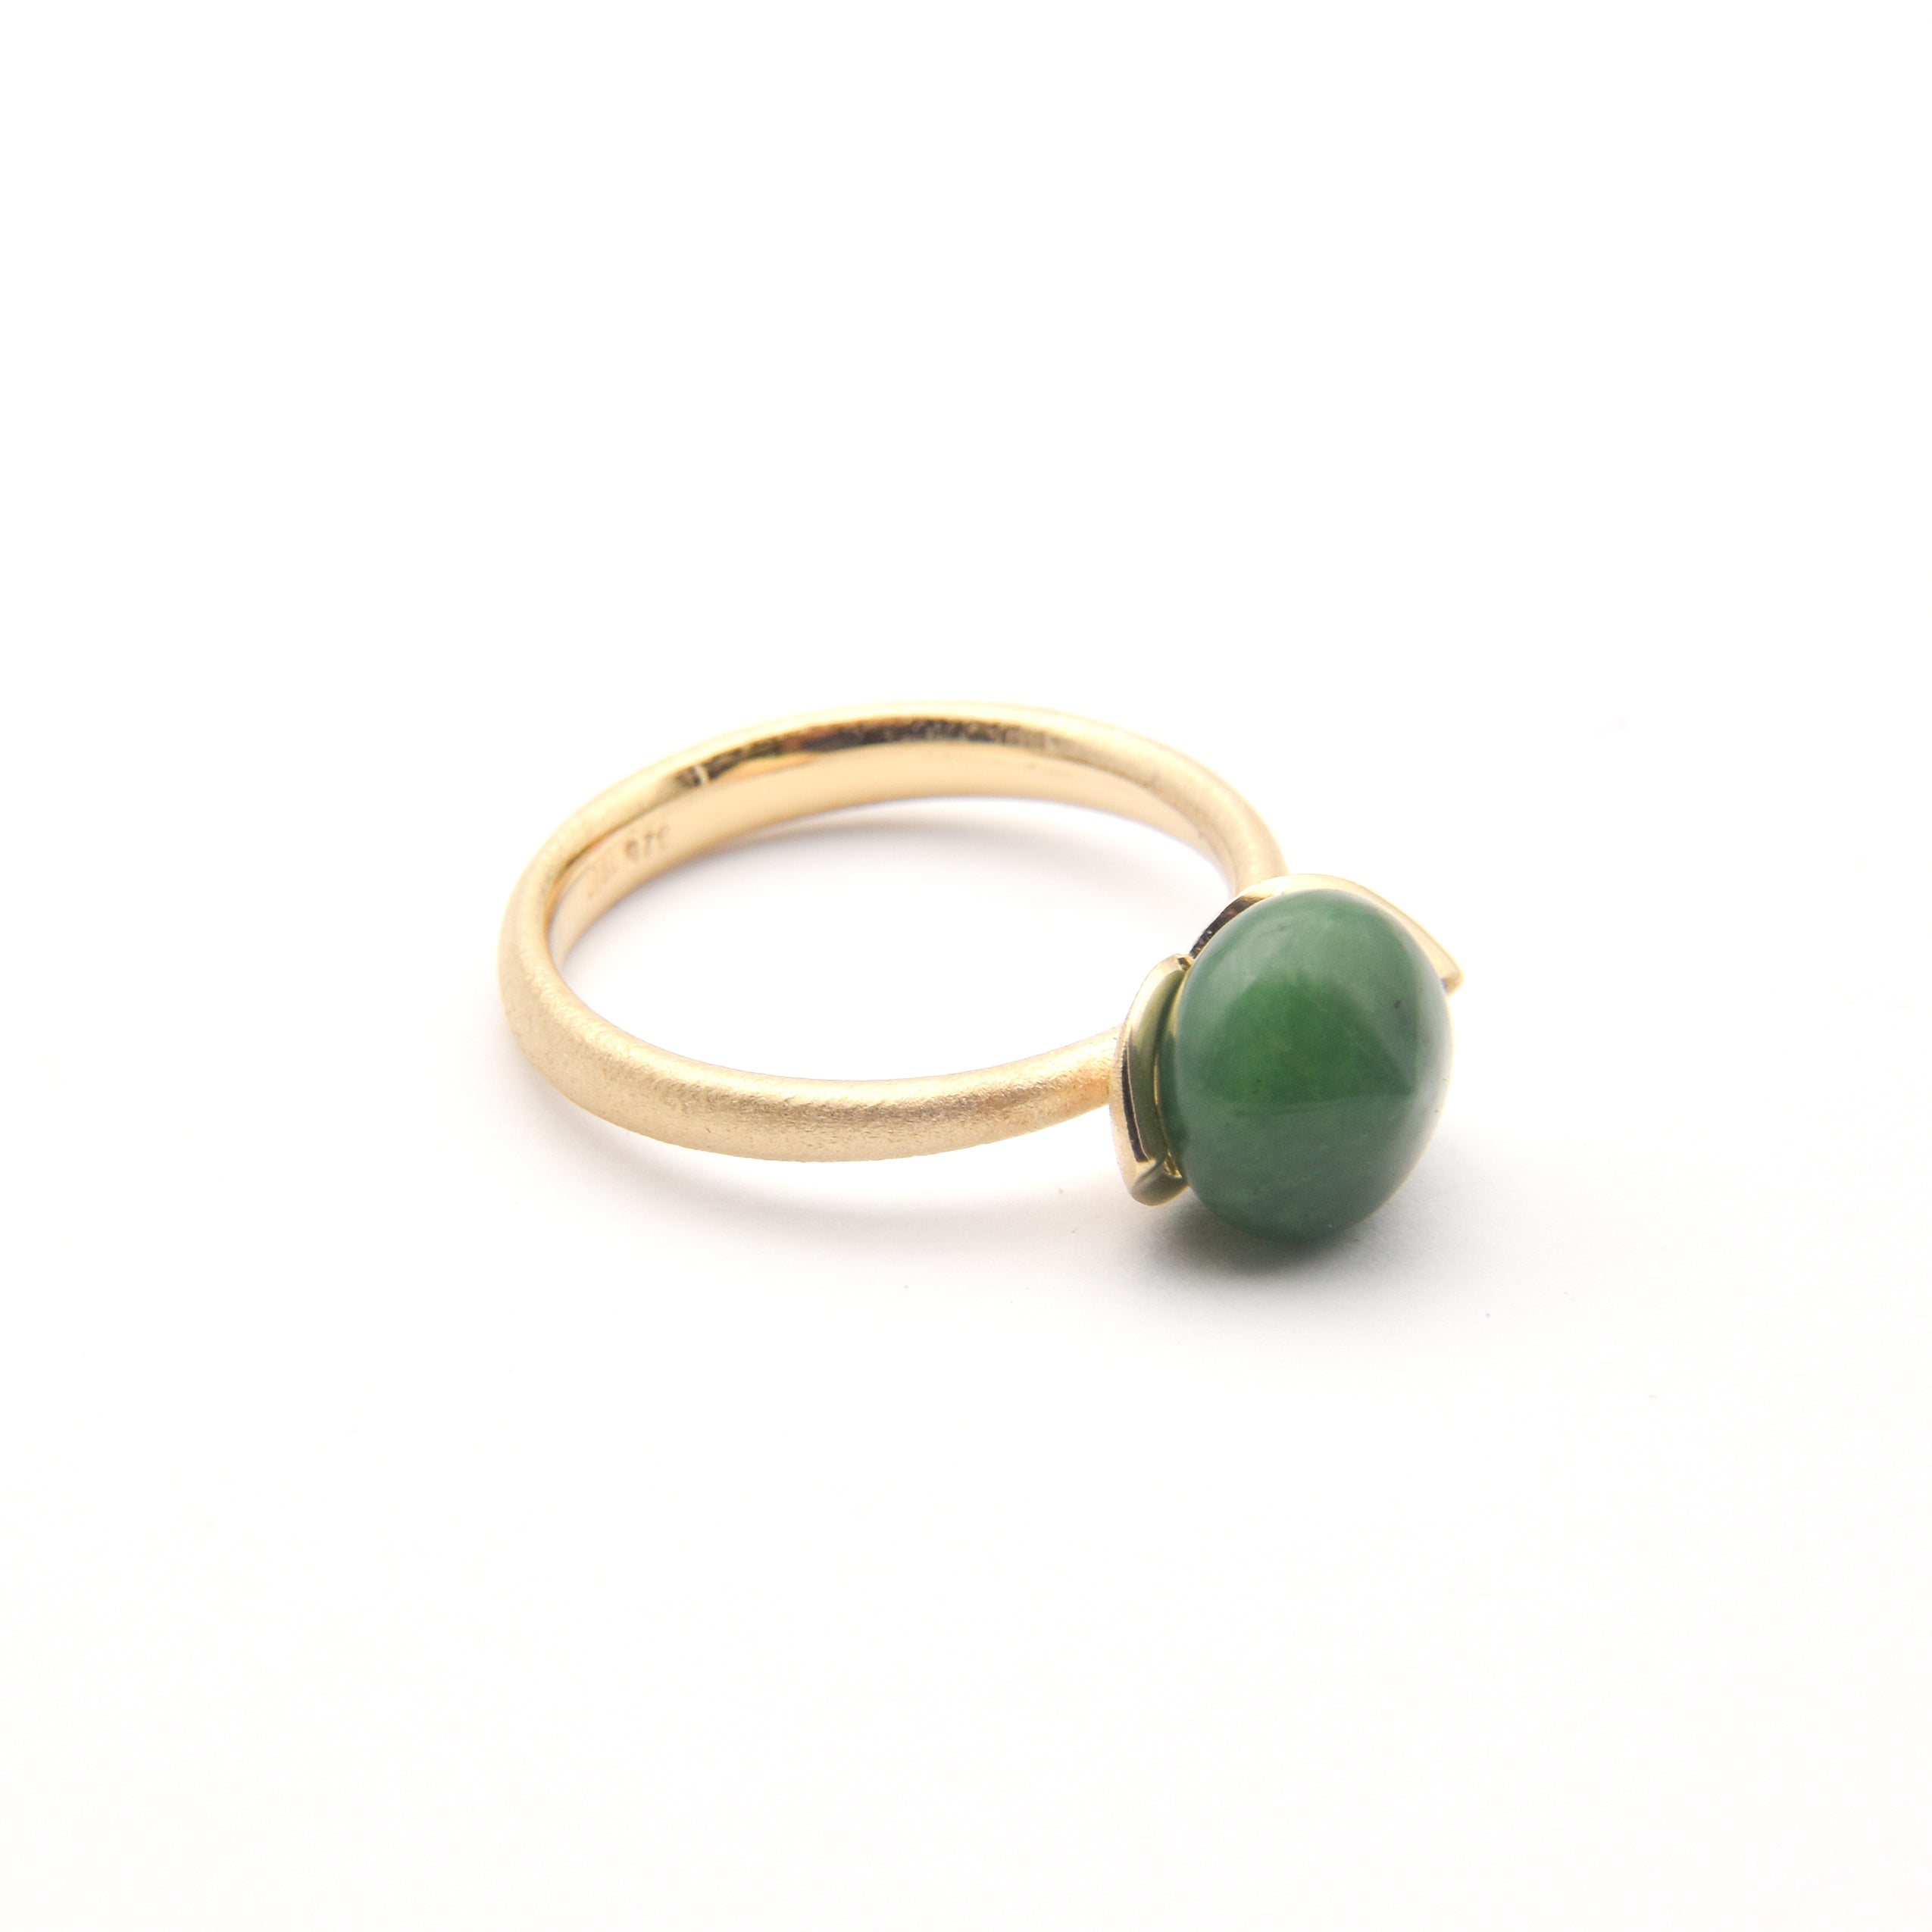 Dolce ring "smal" with jade 925/-